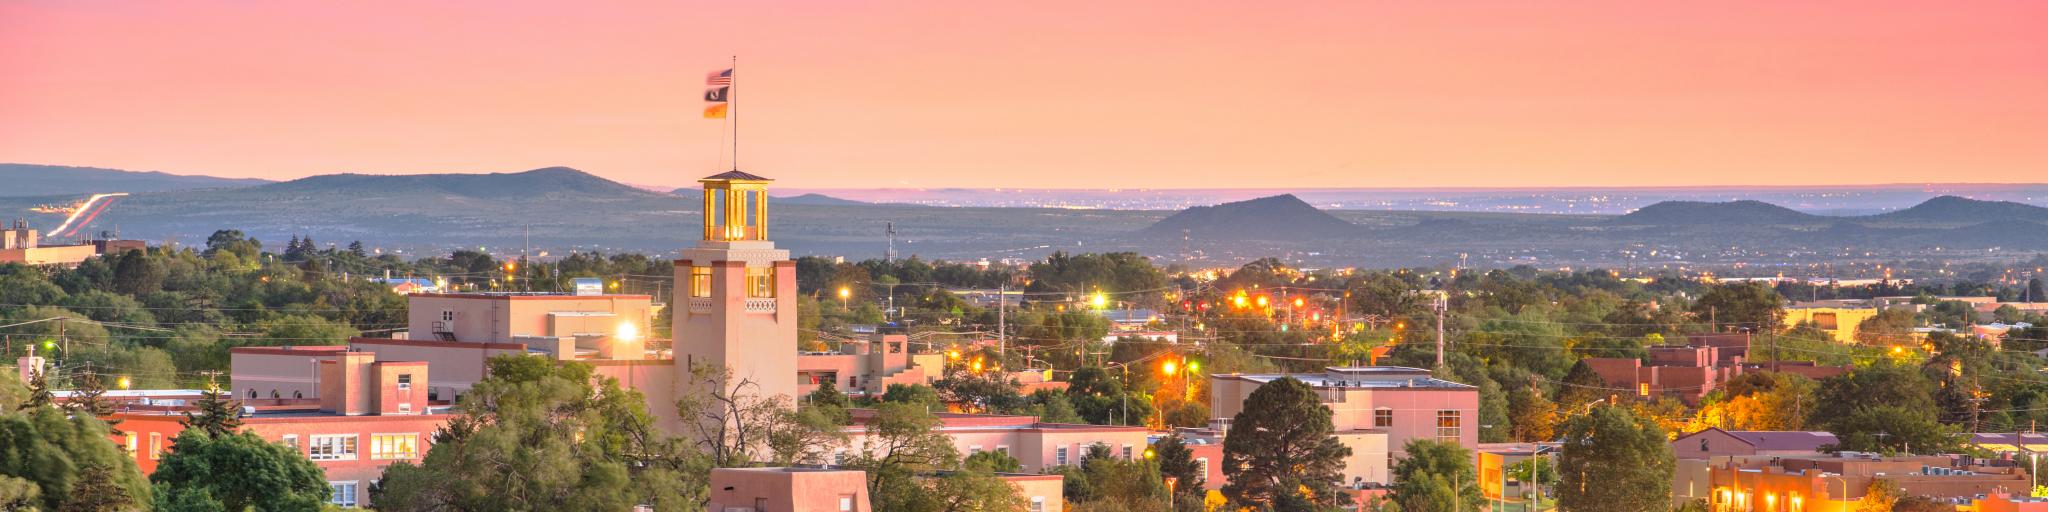 Skyline of downtown Santa Fe, NM at sunset